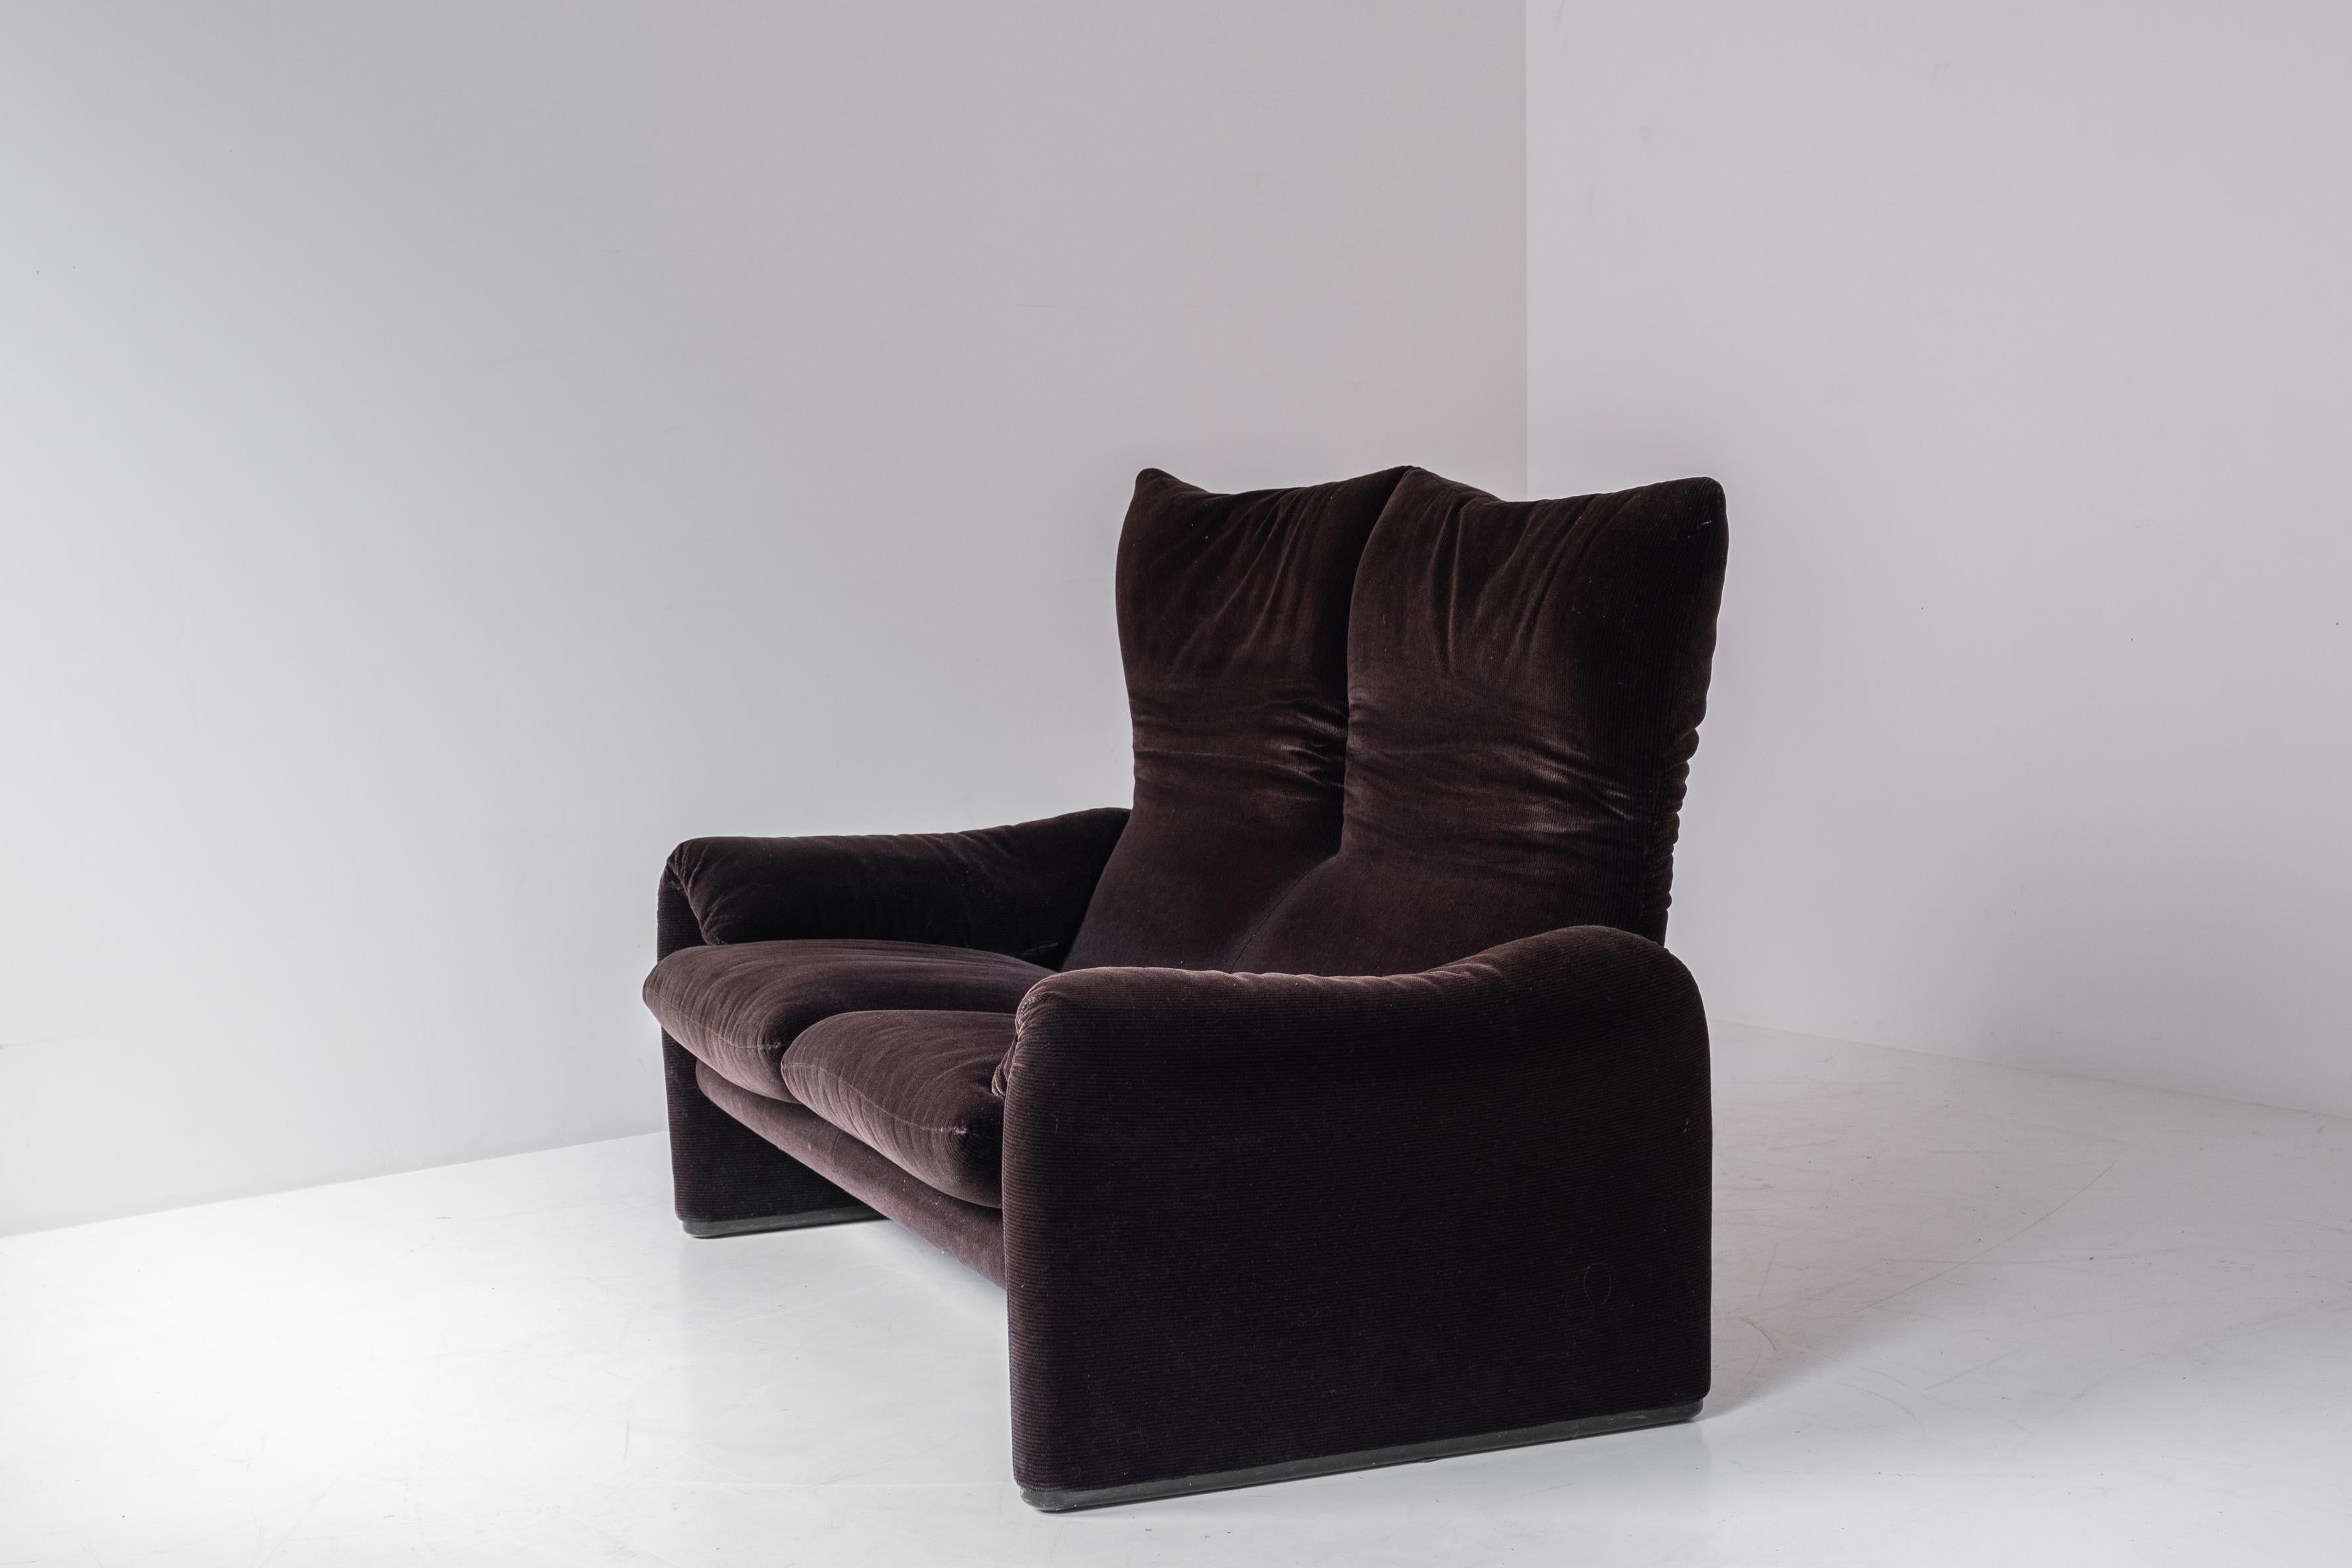 Maralunga two-seater by Vico Magistretti for Cassina, Italy 1970s. 5